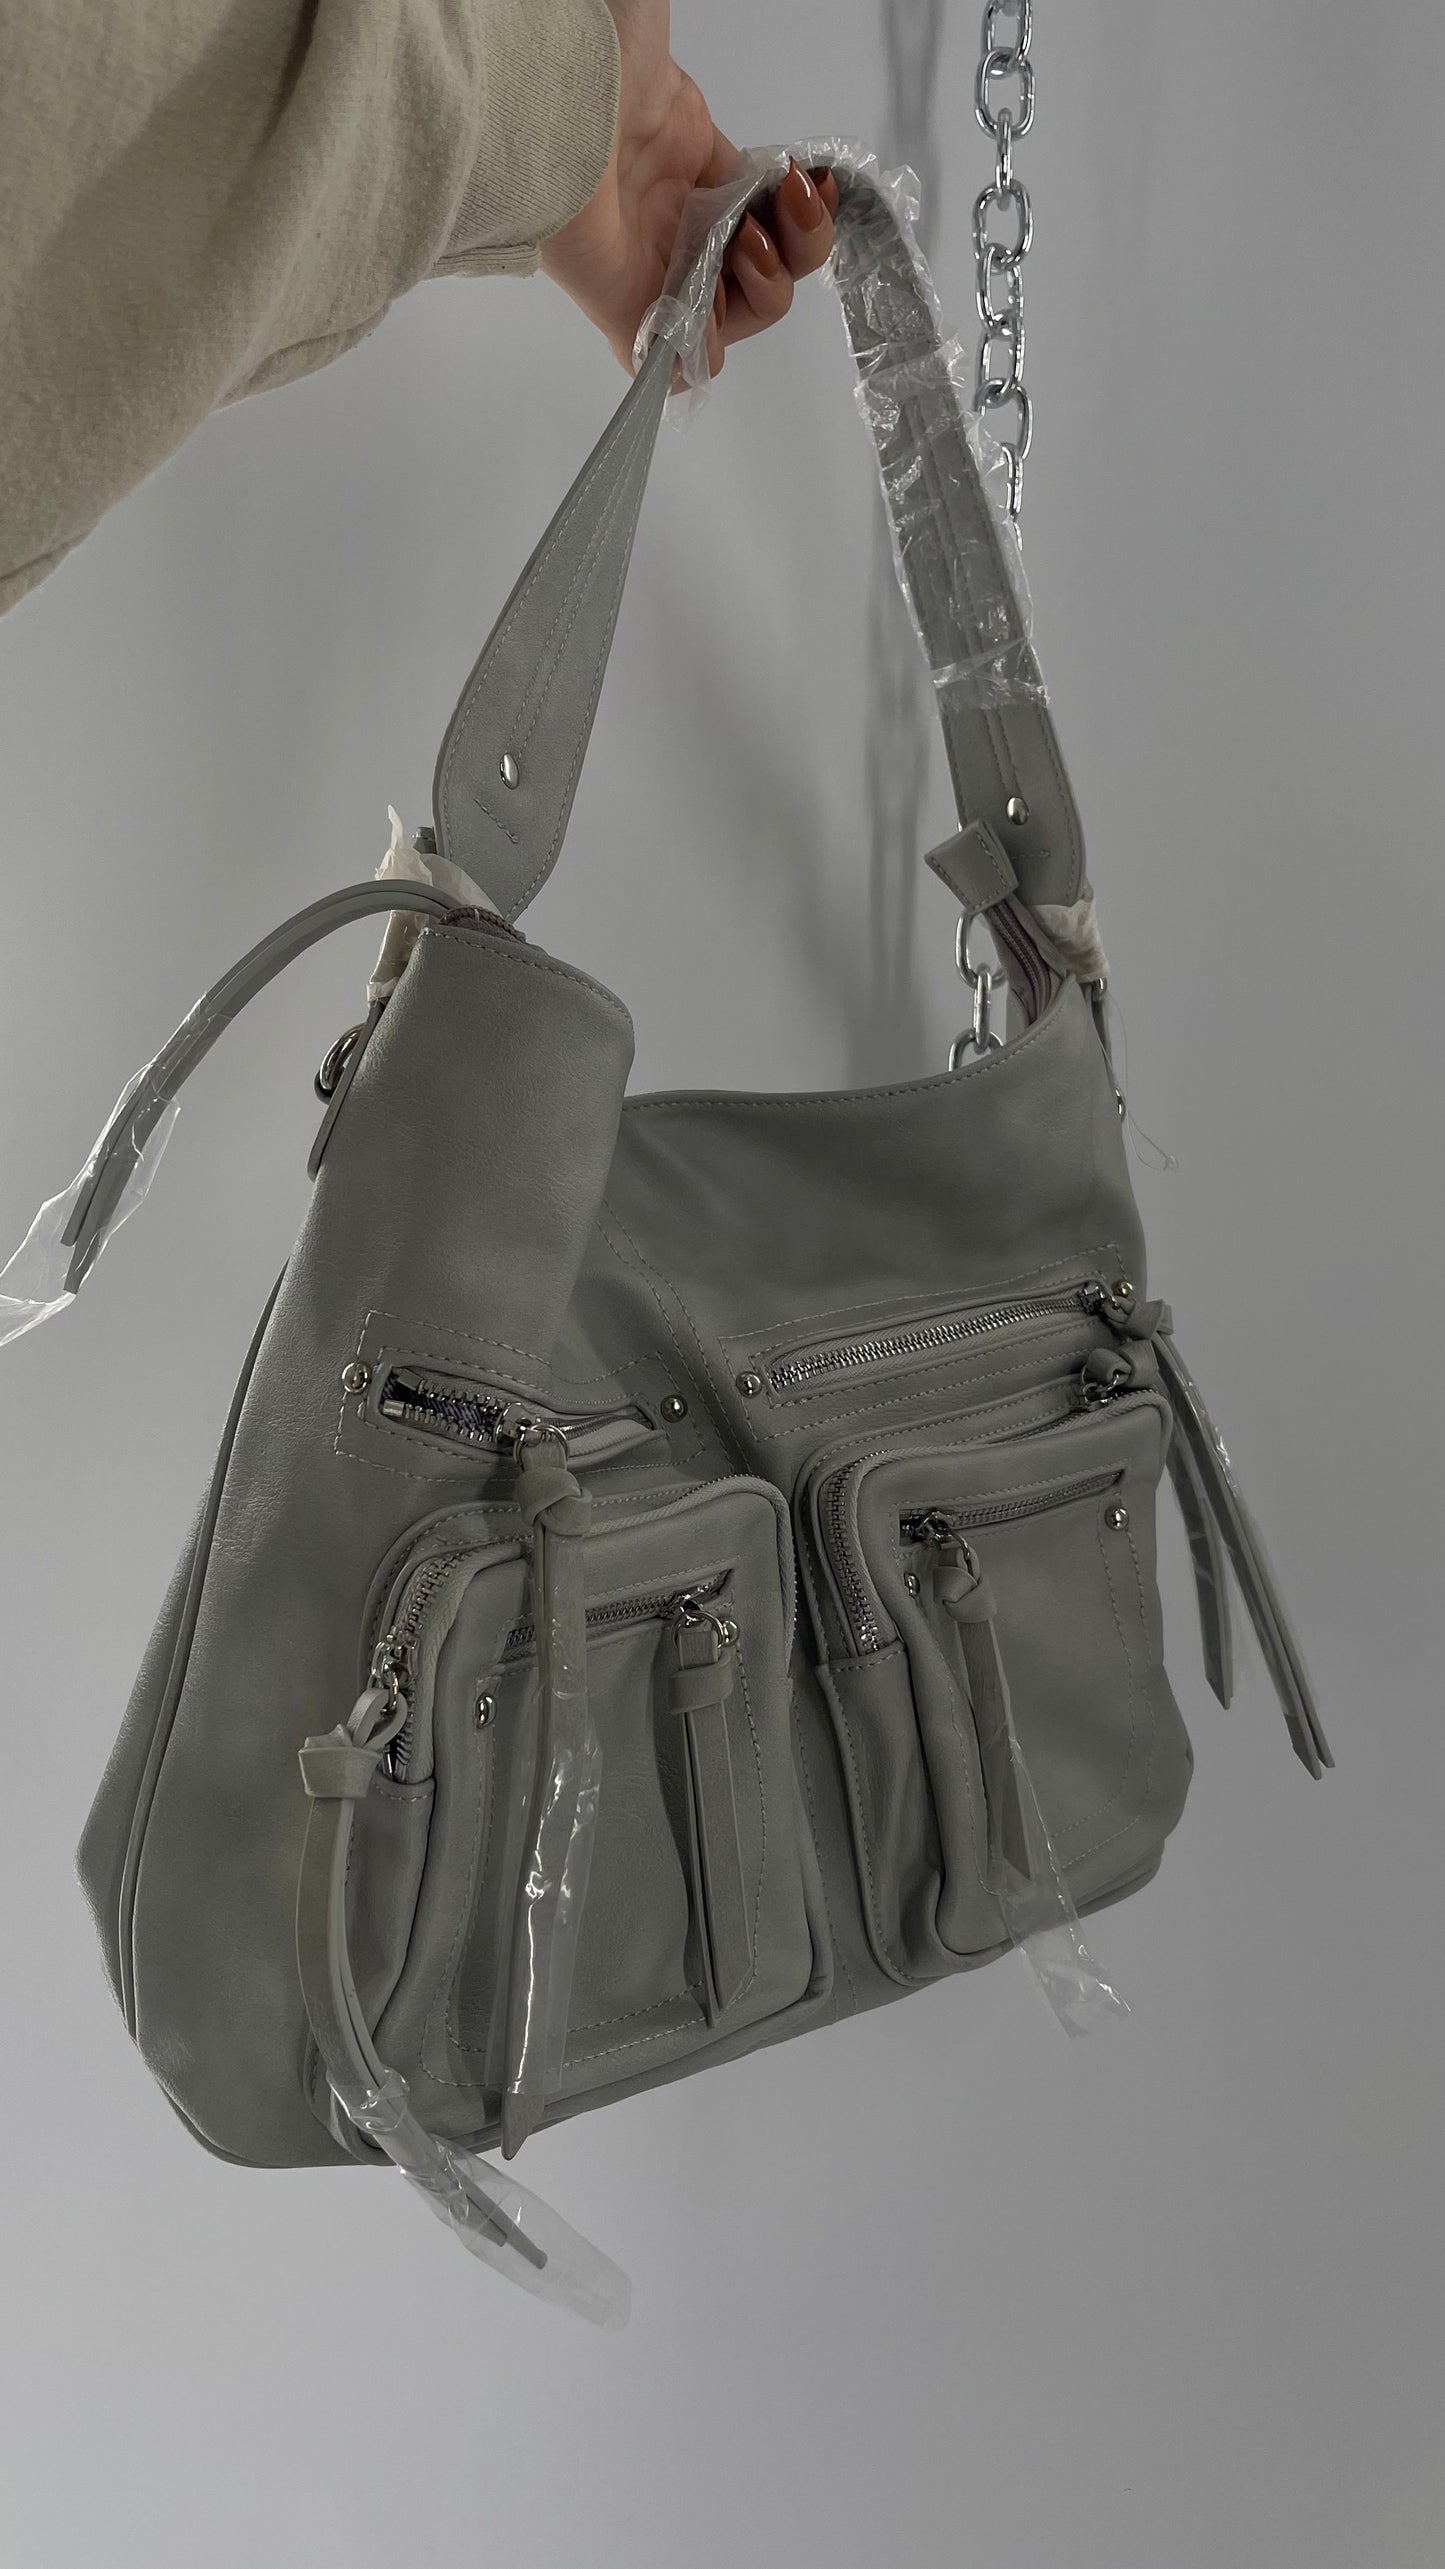 Free People Grey Leather Bag with Heavy Silver Metal Detailing, Pockets and Extra Strap